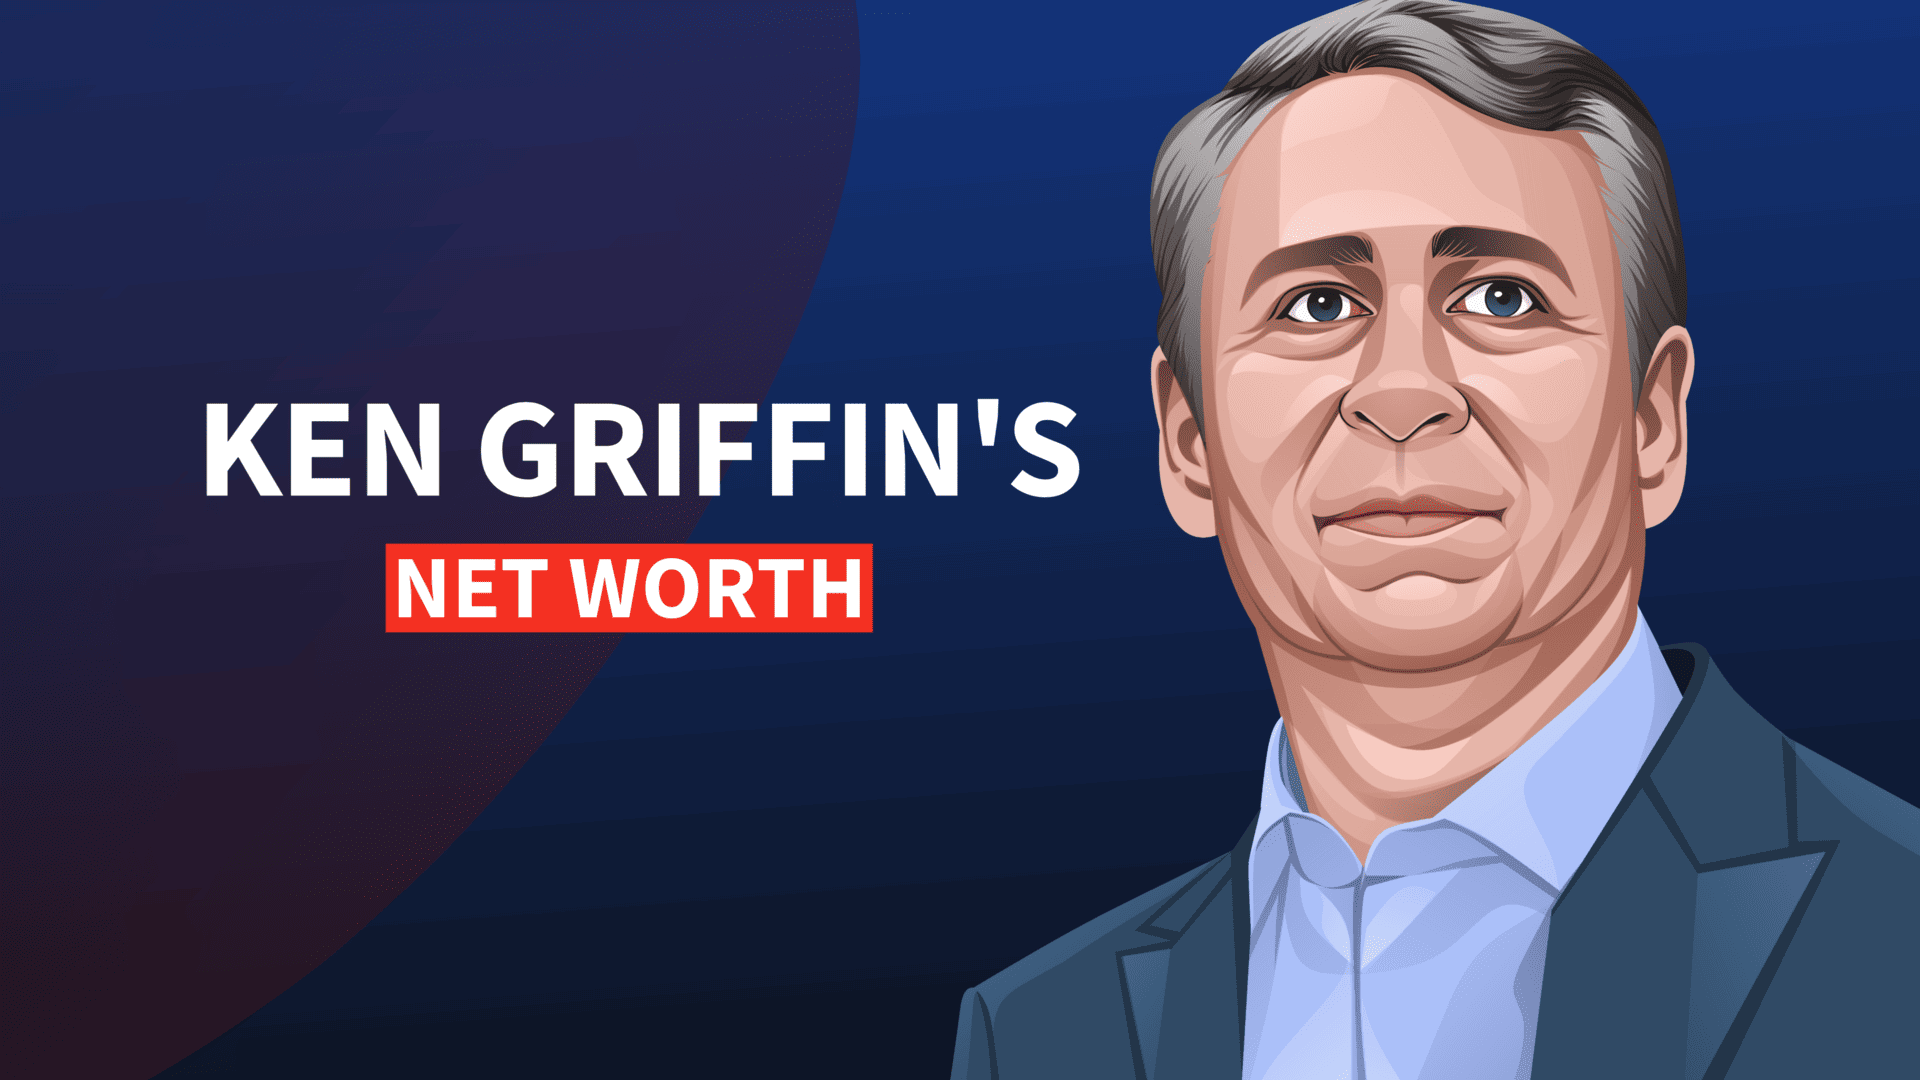 Ken Griffin's Net Worth and Inspiring Story